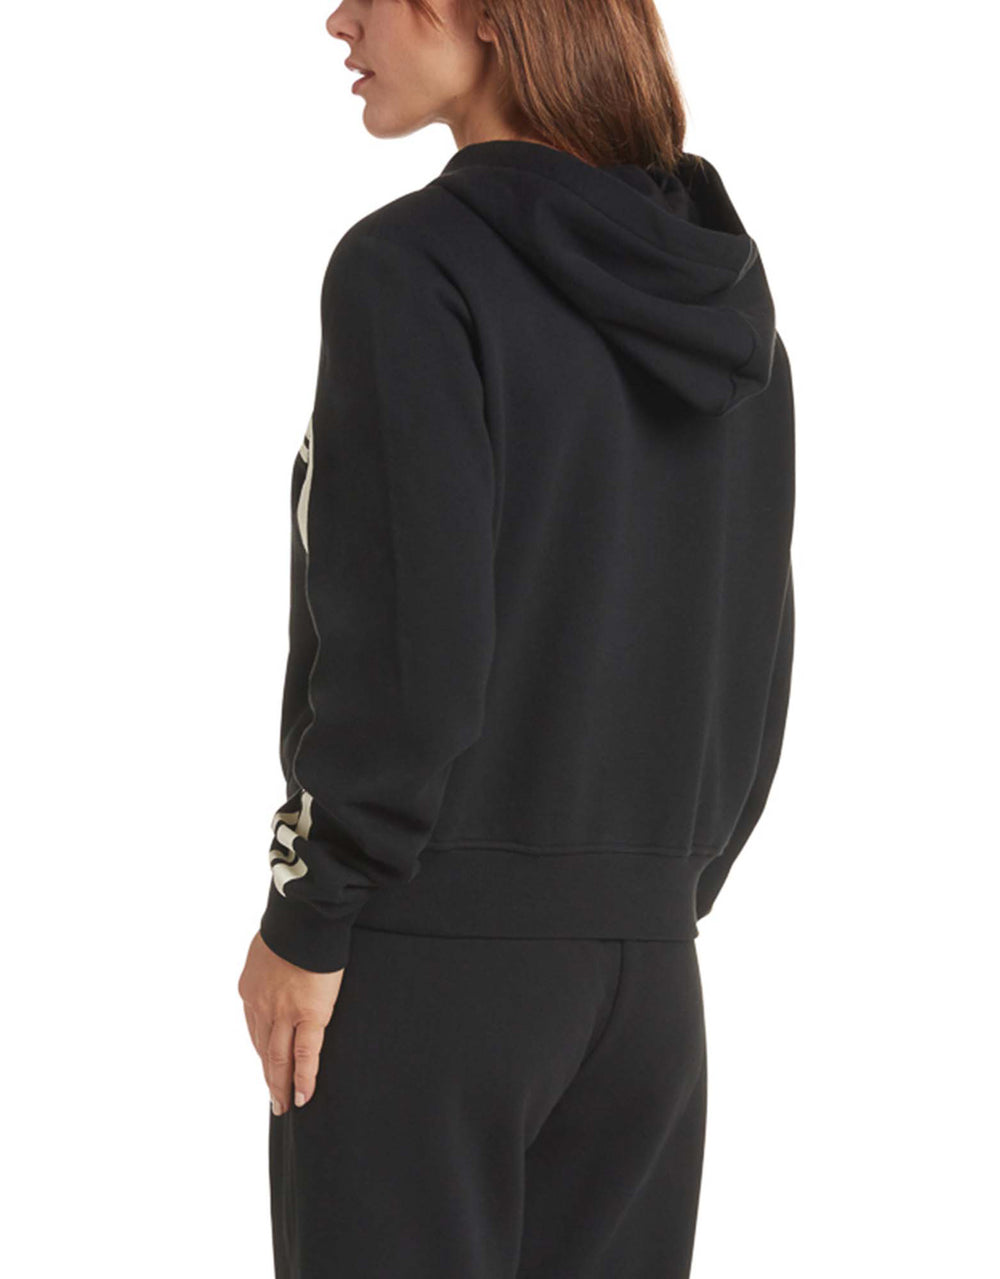 Come On Over Cropped Hoodie - Black